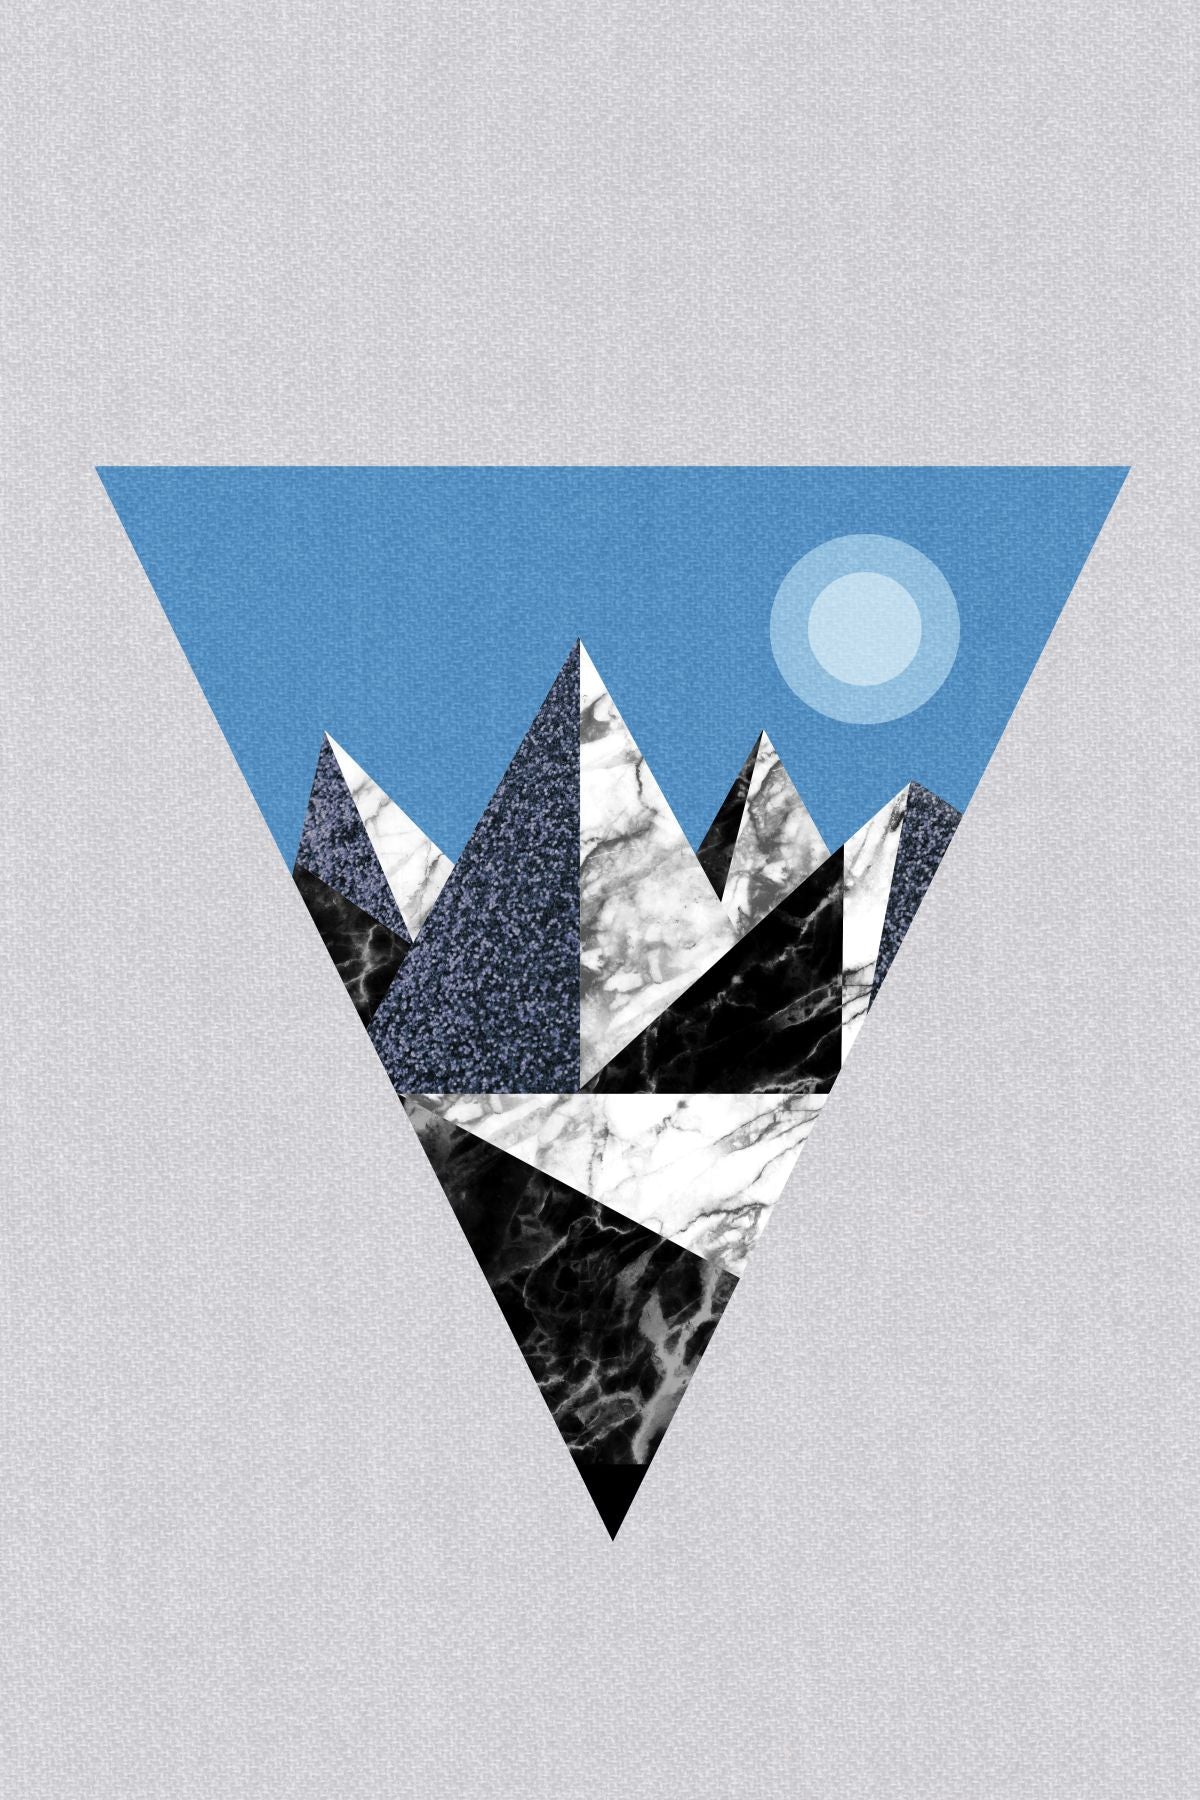 Abstract Triangle Mountains